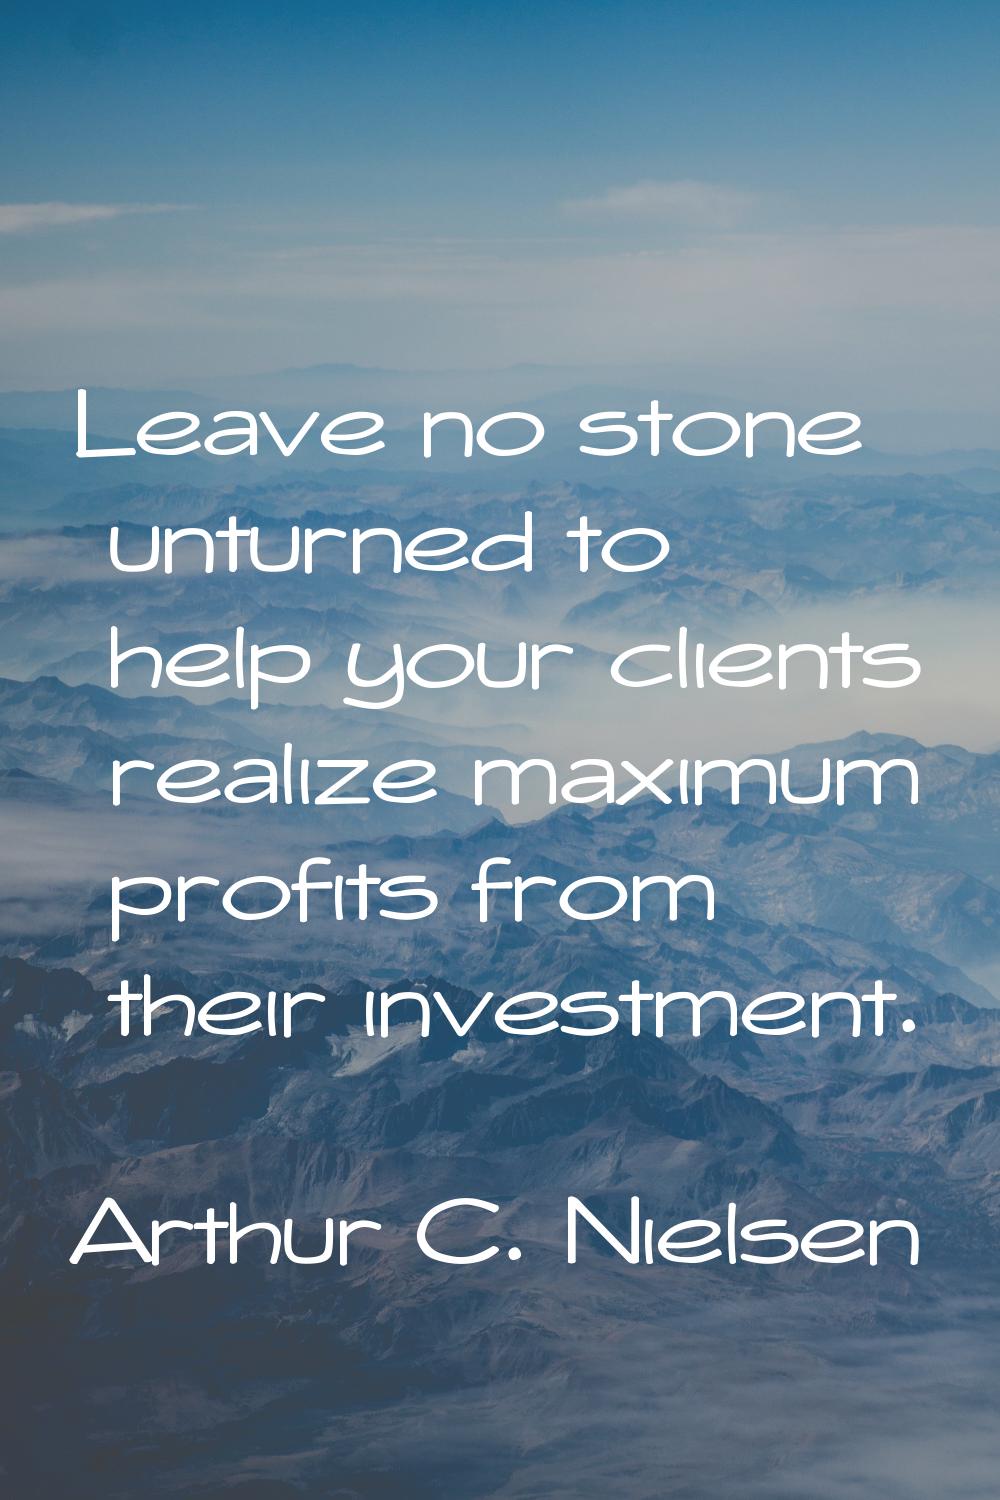 Leave no stone unturned to help your clients realize maximum profits from their investment.